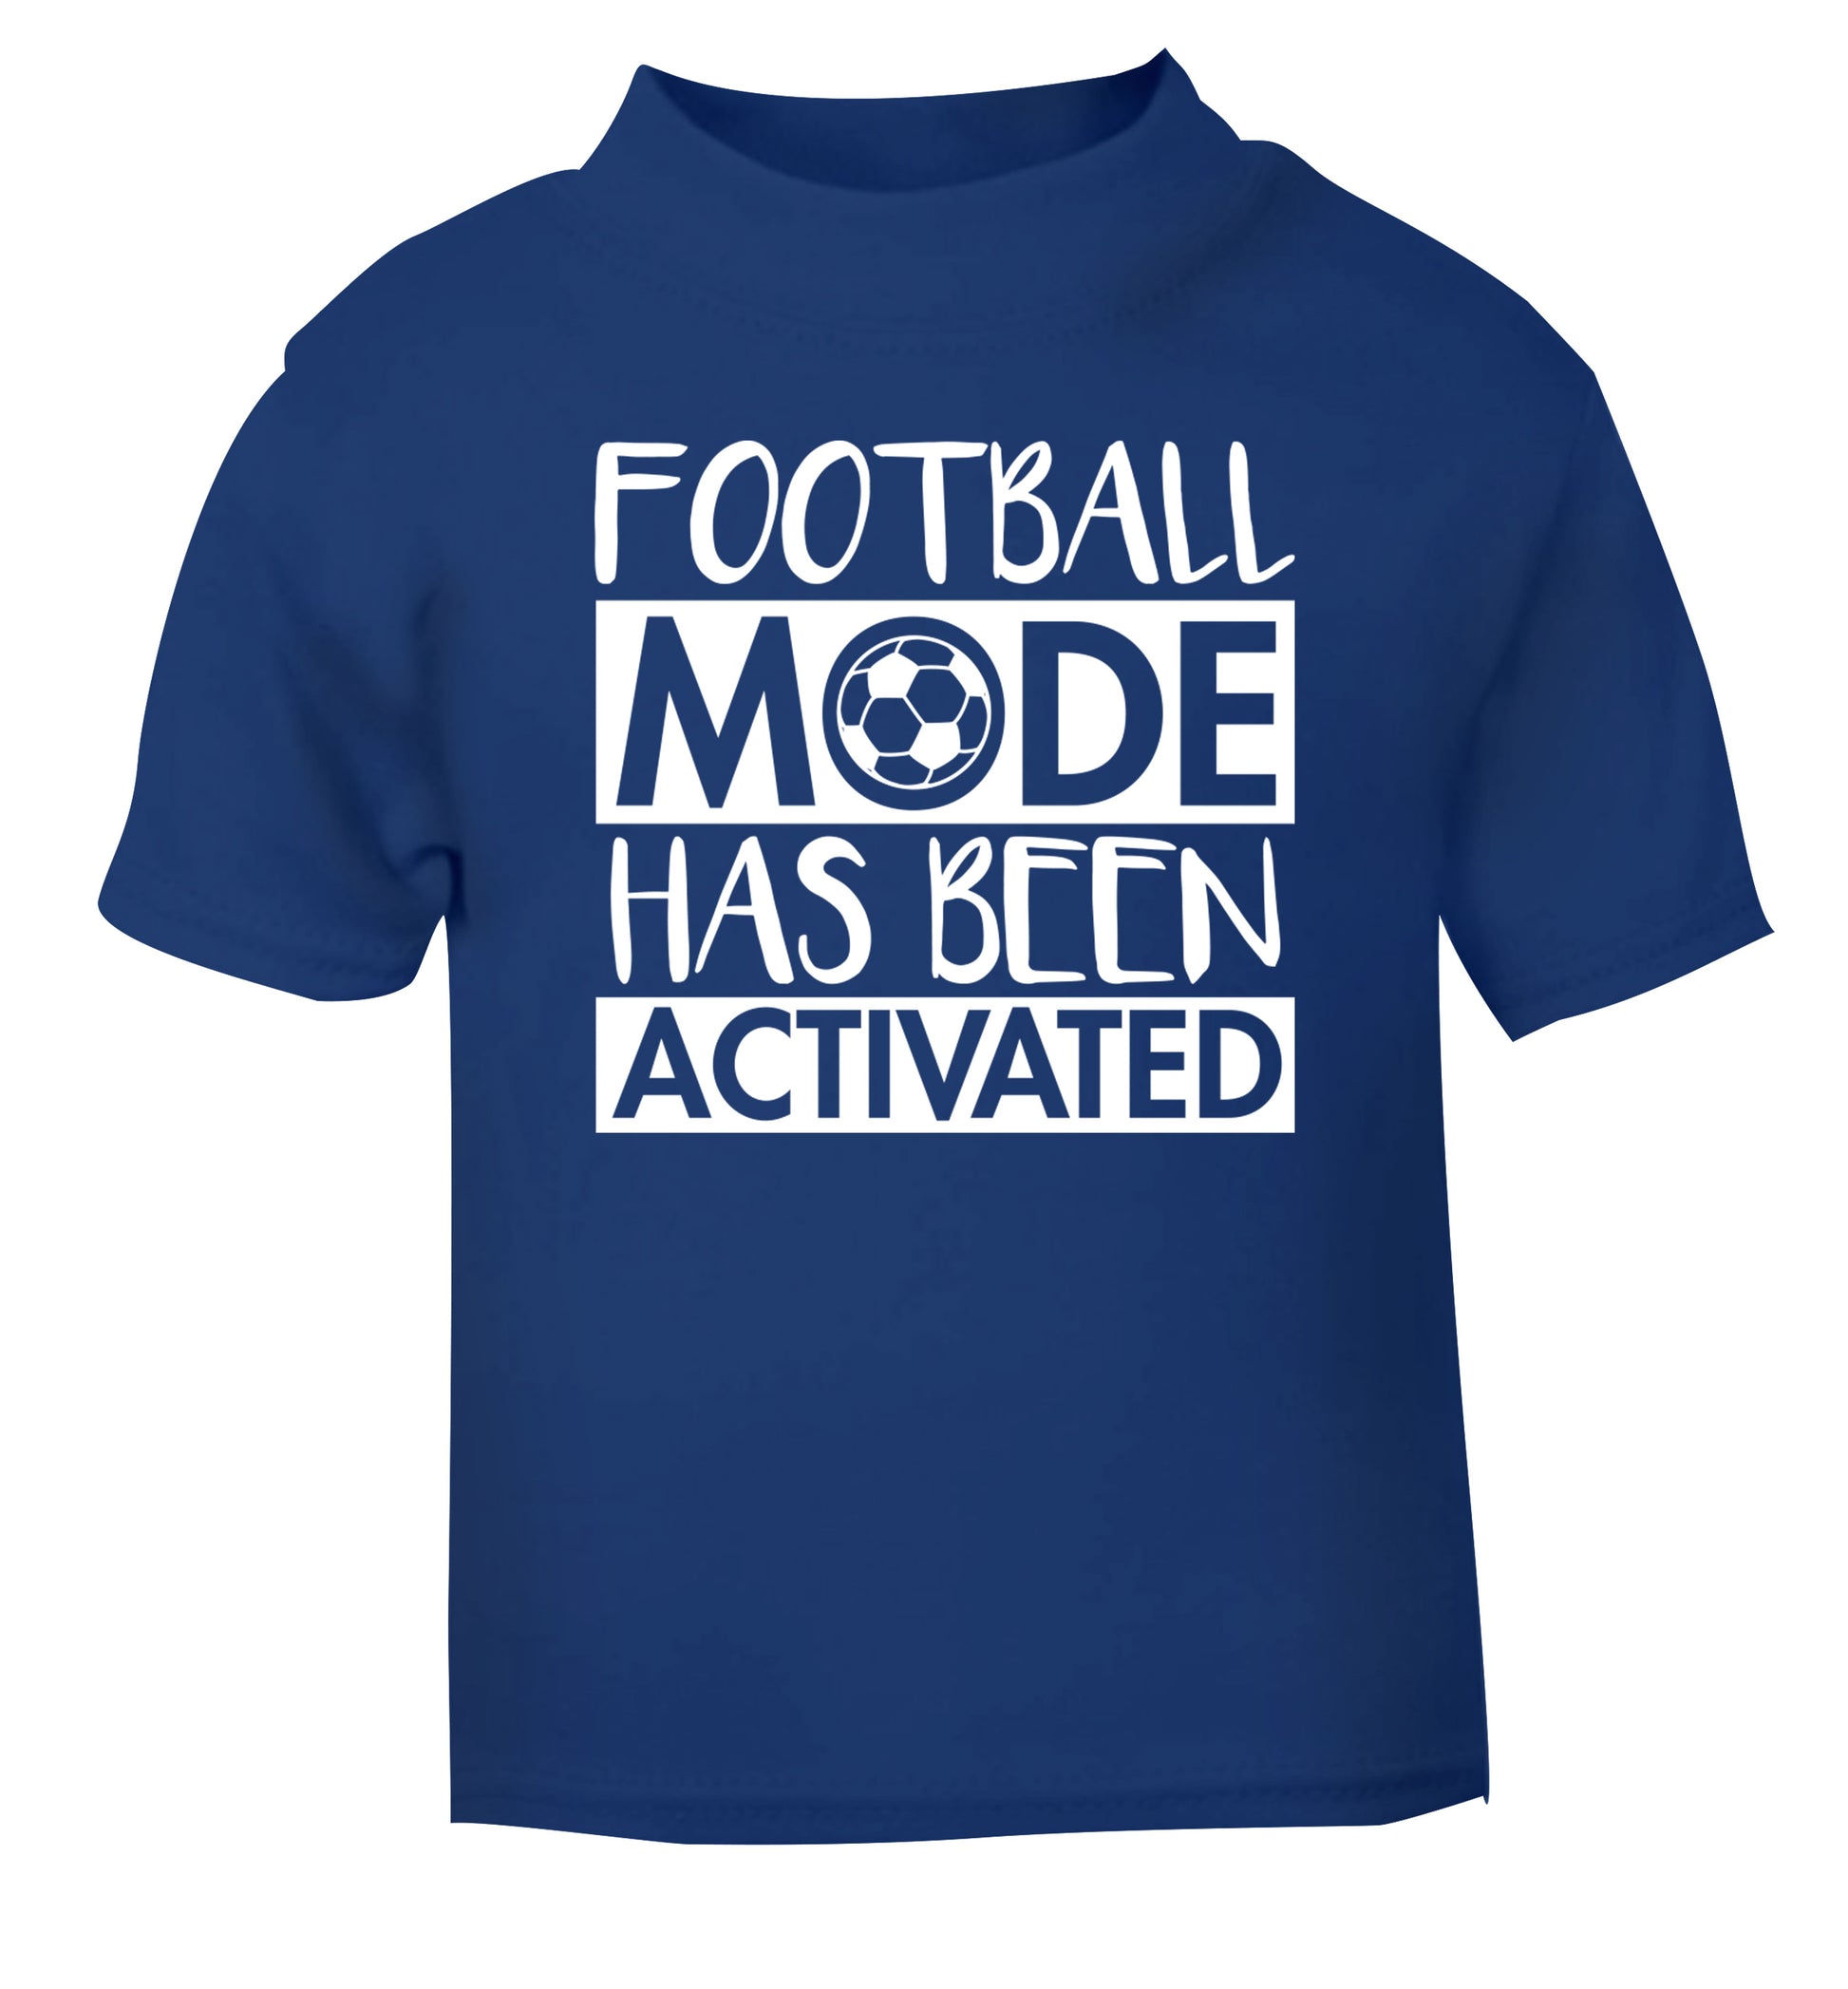 Football mode has been activated blue Baby Toddler Tshirt 2 Years